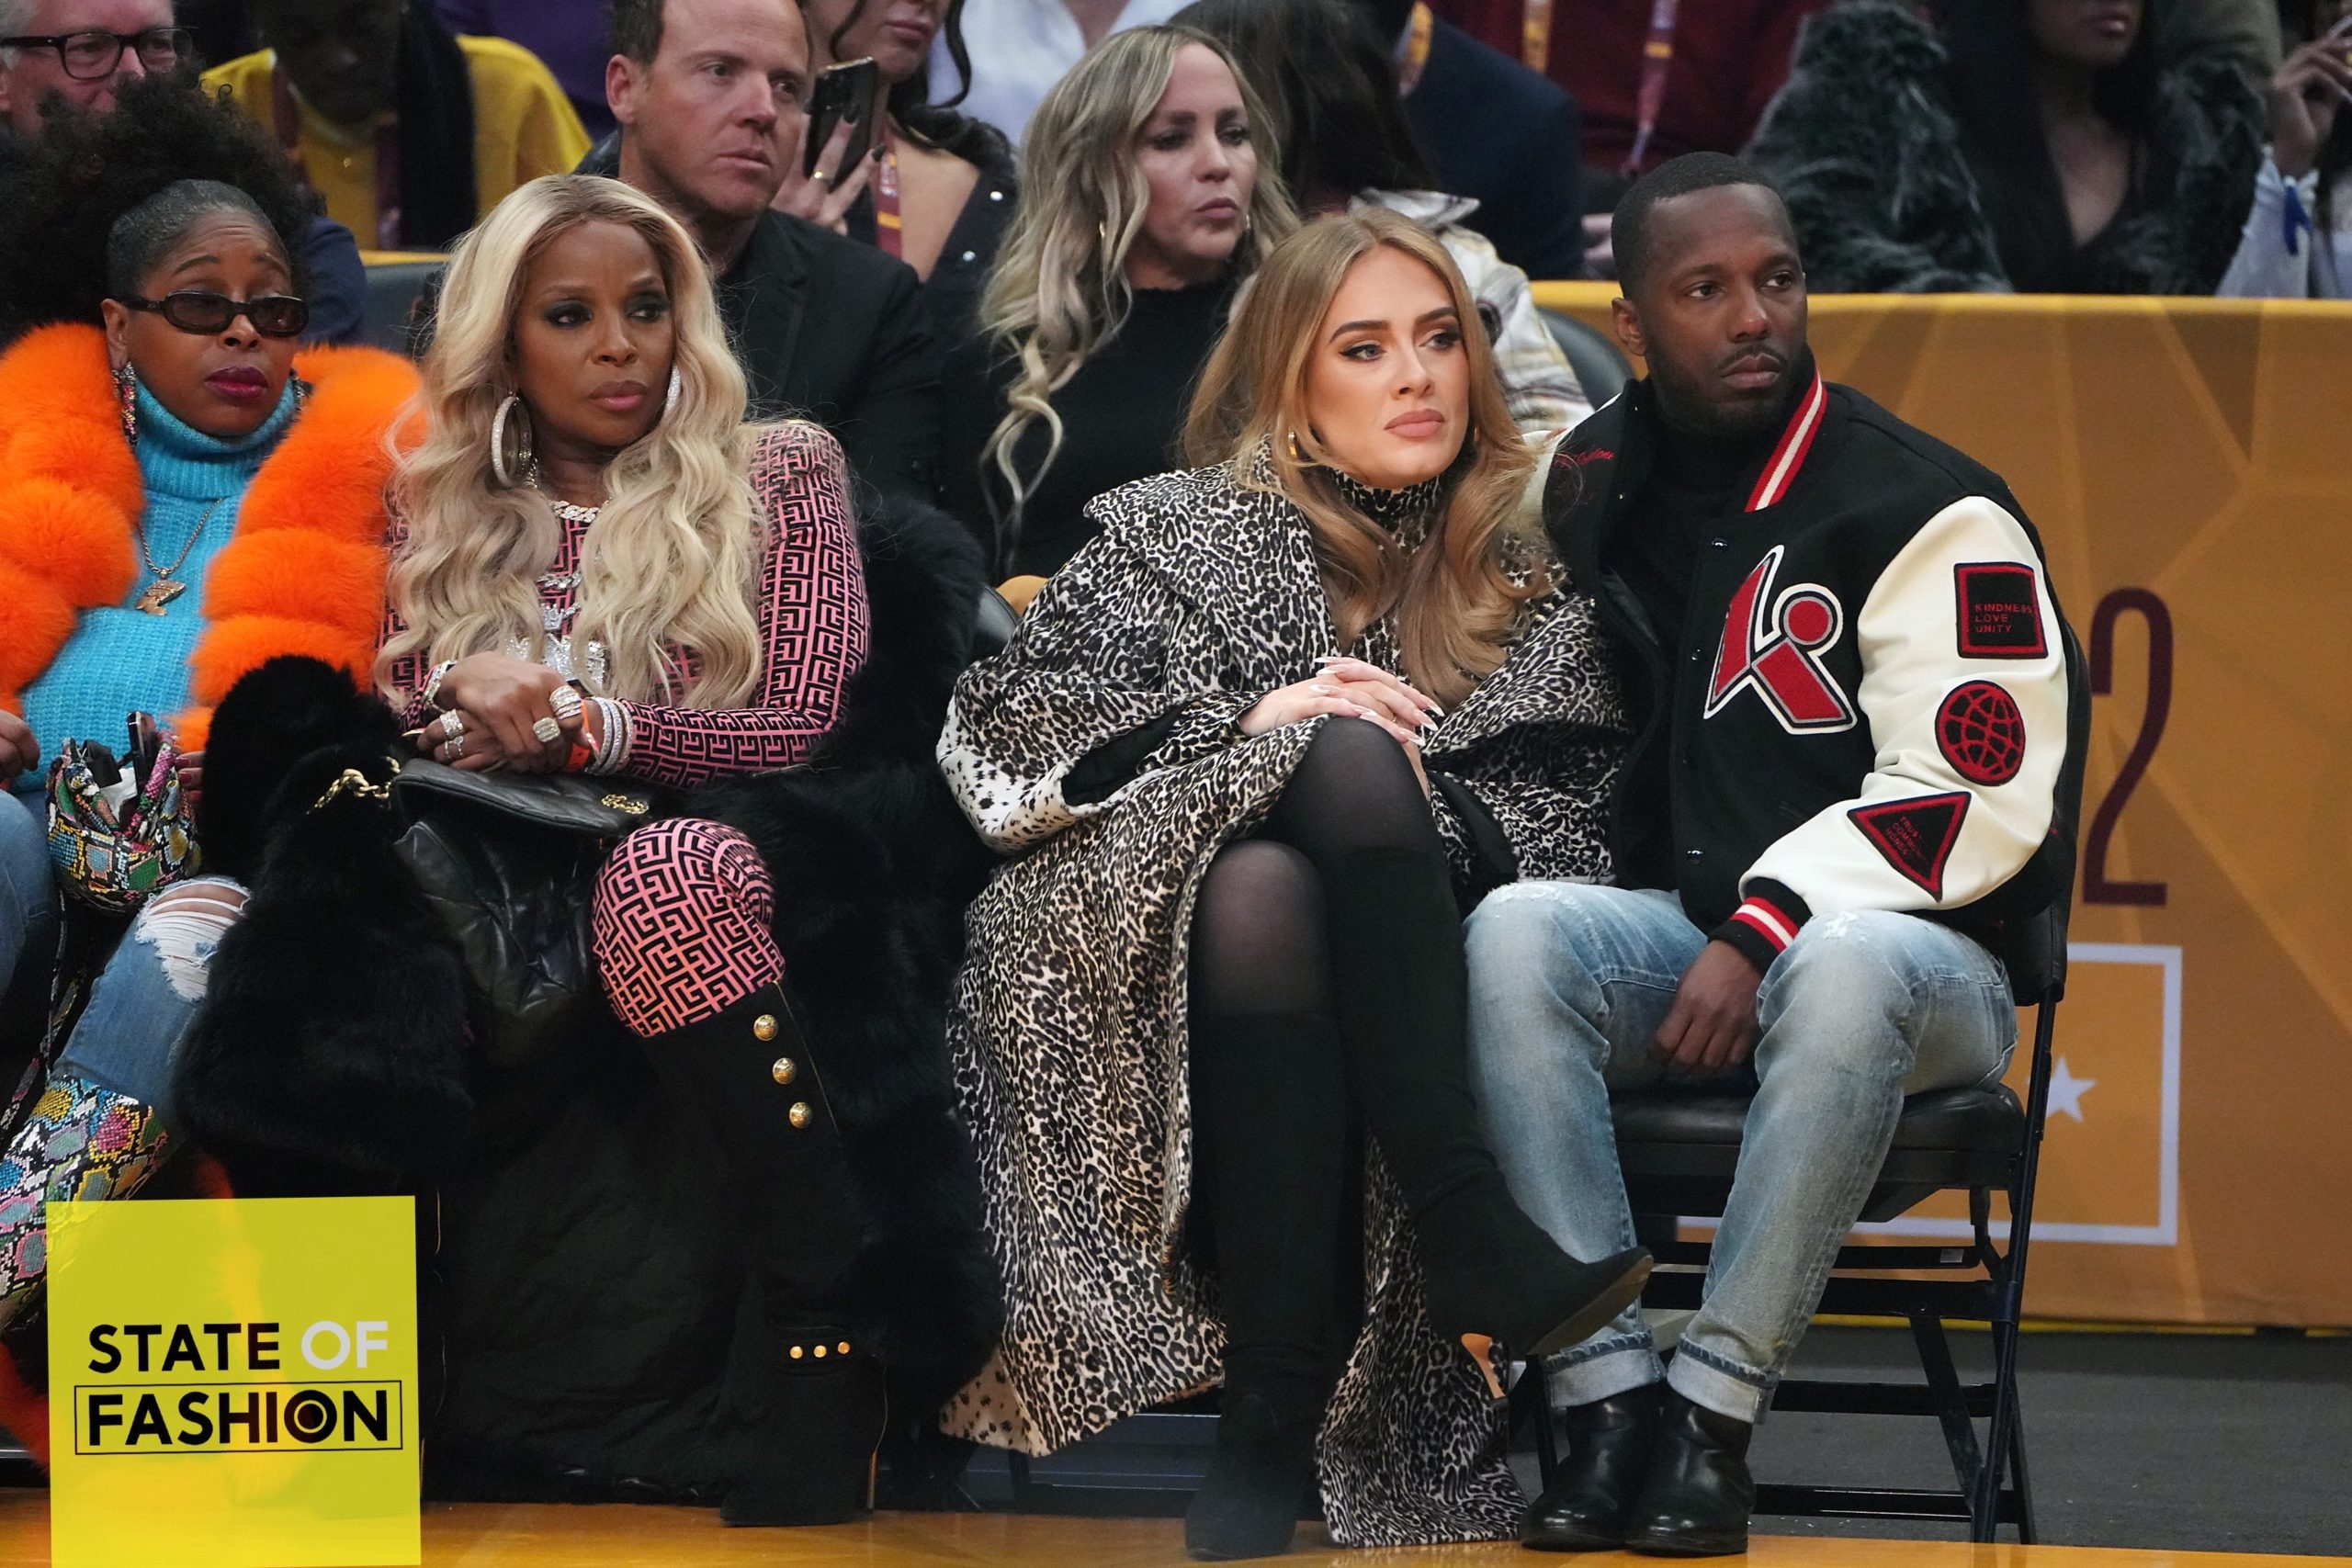 On the State of Fashion: Star Style at NBA Allstar Weekend including Mary J  Blige in Pink and Black Balmain, Usher in Neon Bottega, and More! – Fashion  Bomb Daily